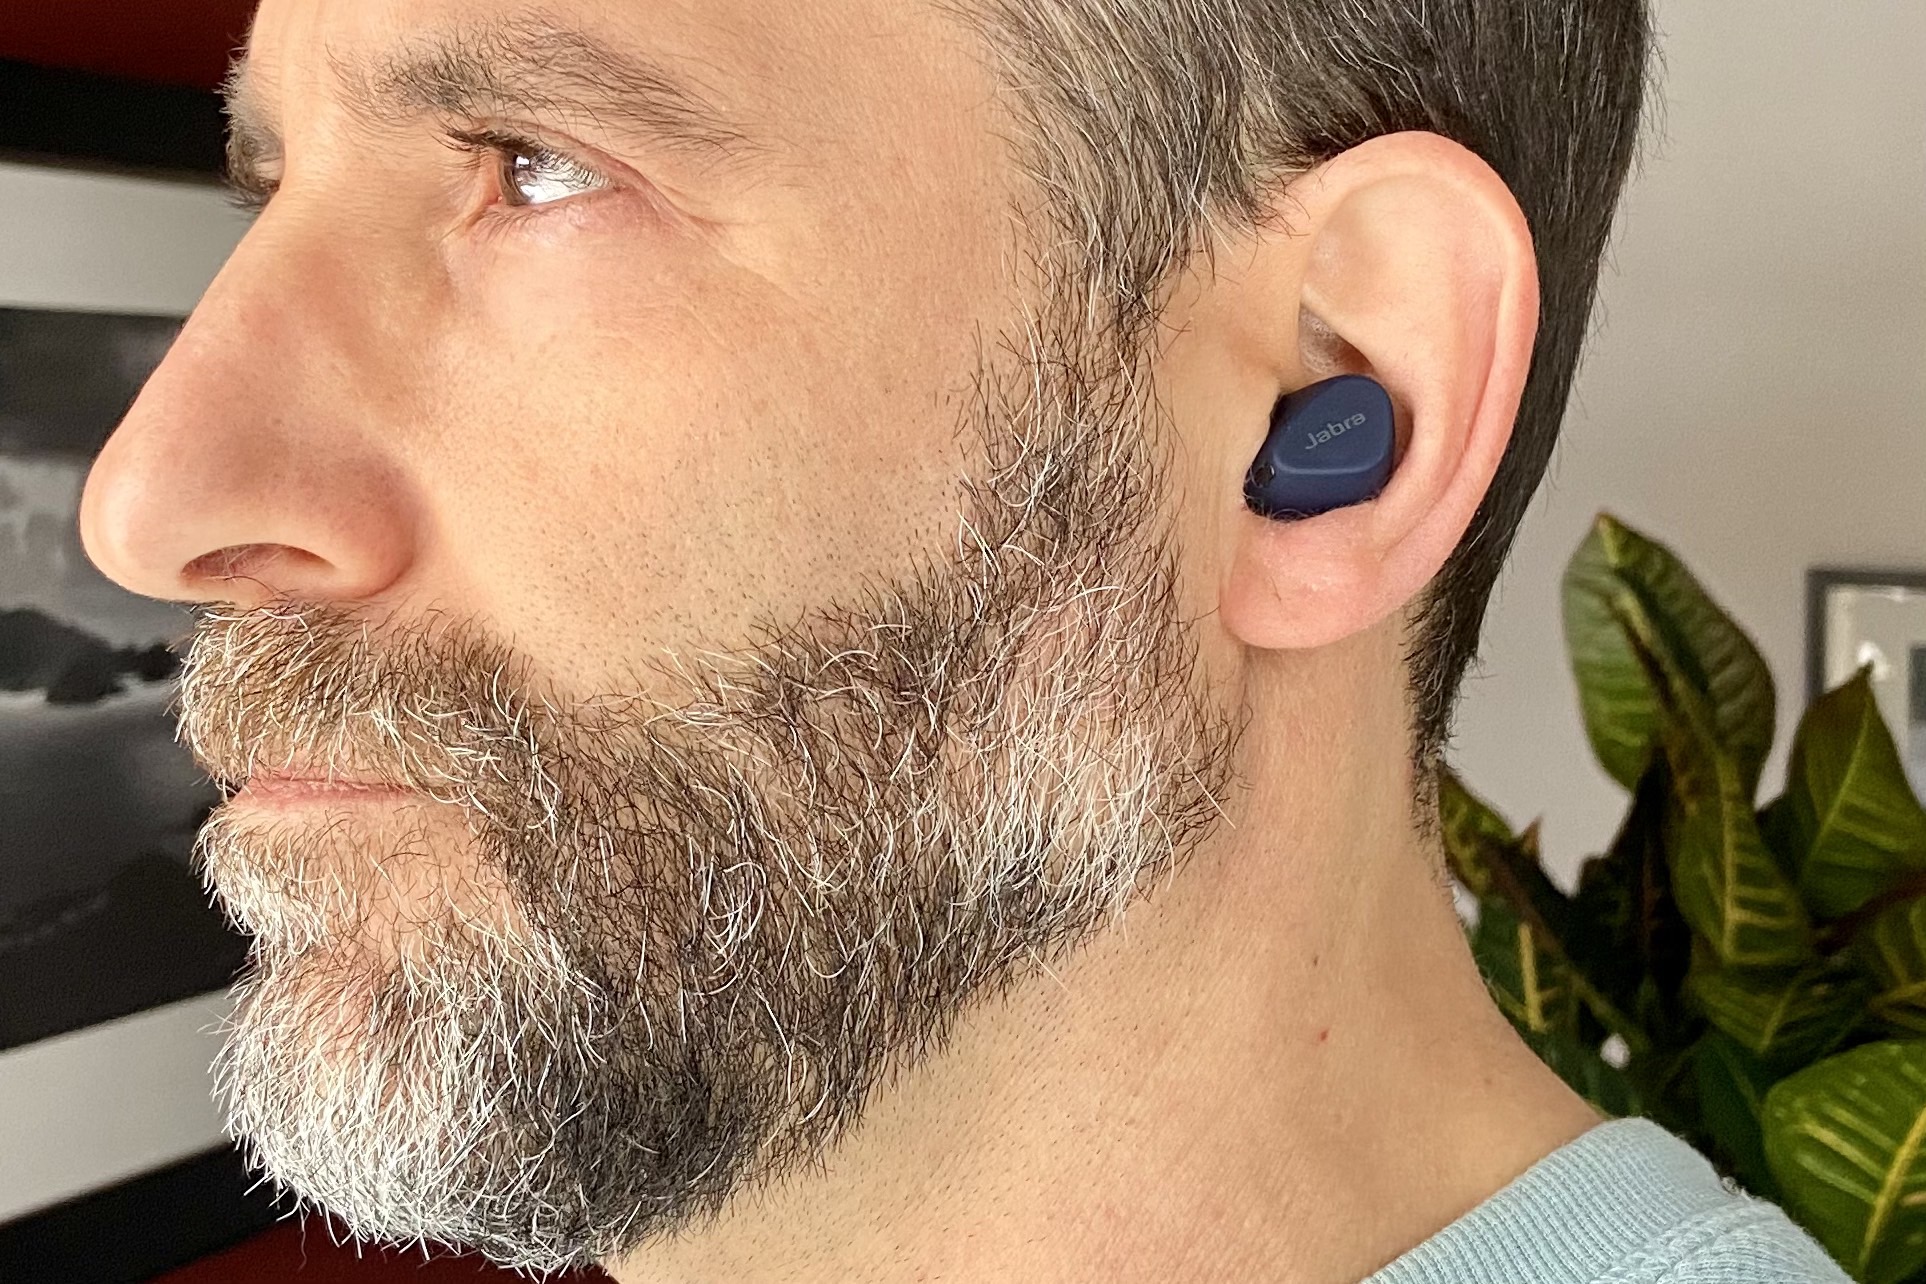 Jabra Elite 4 review: The good kind of cheap